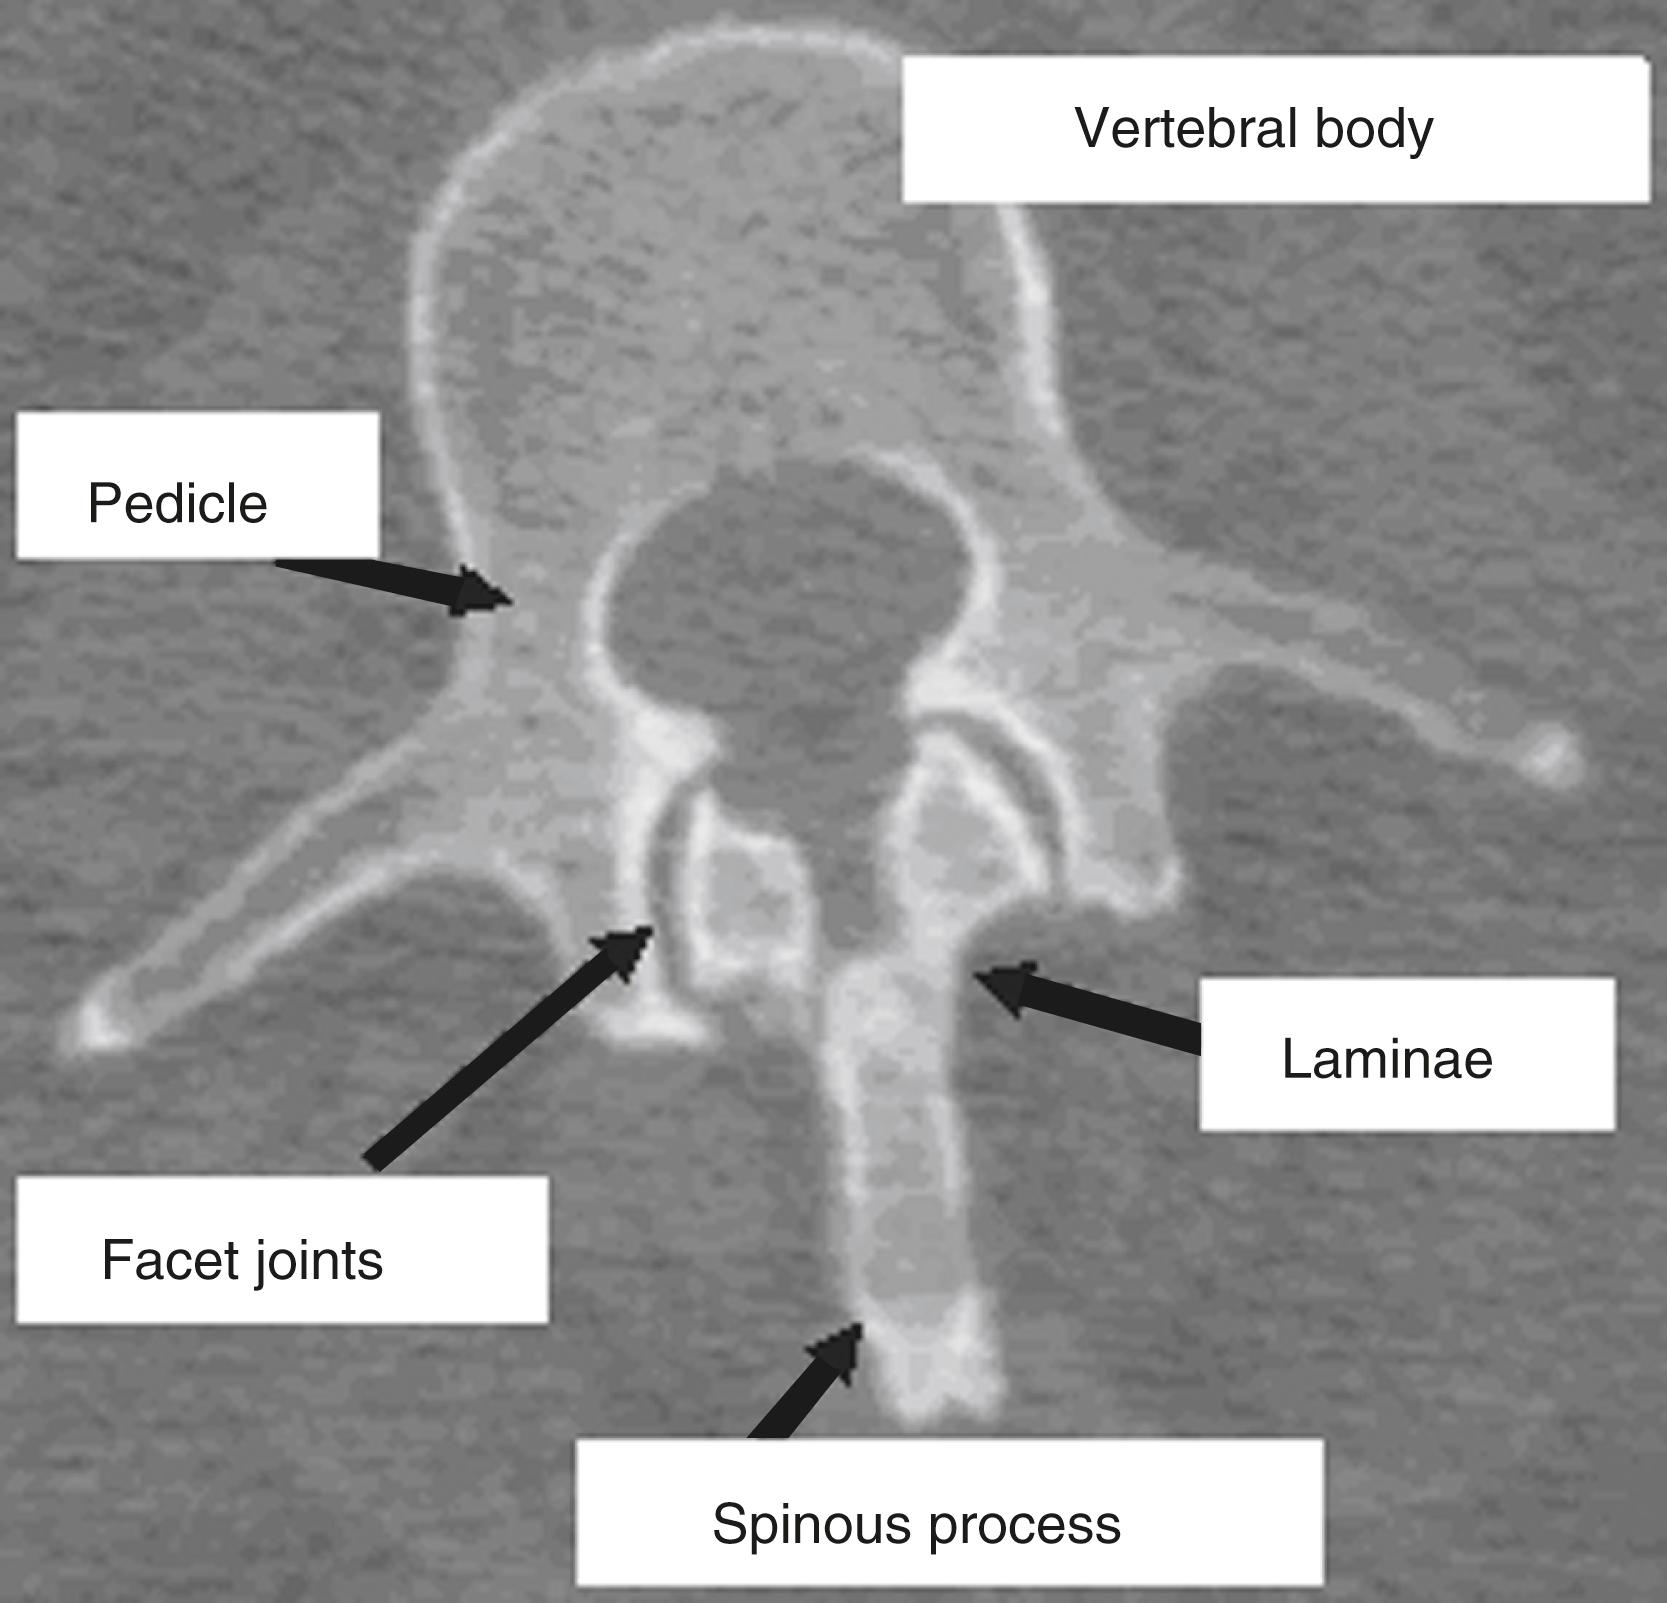 Fig. 167.1, Axial computed tomography image of the L2 vertebral body identifying the dorsal elements.